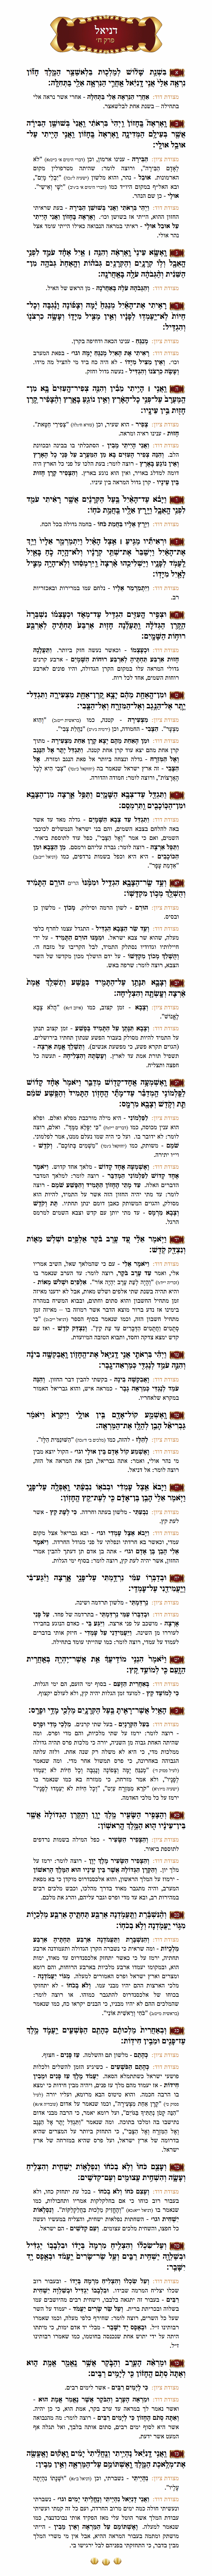 Sefer Daniel Chapter 8 with commentary